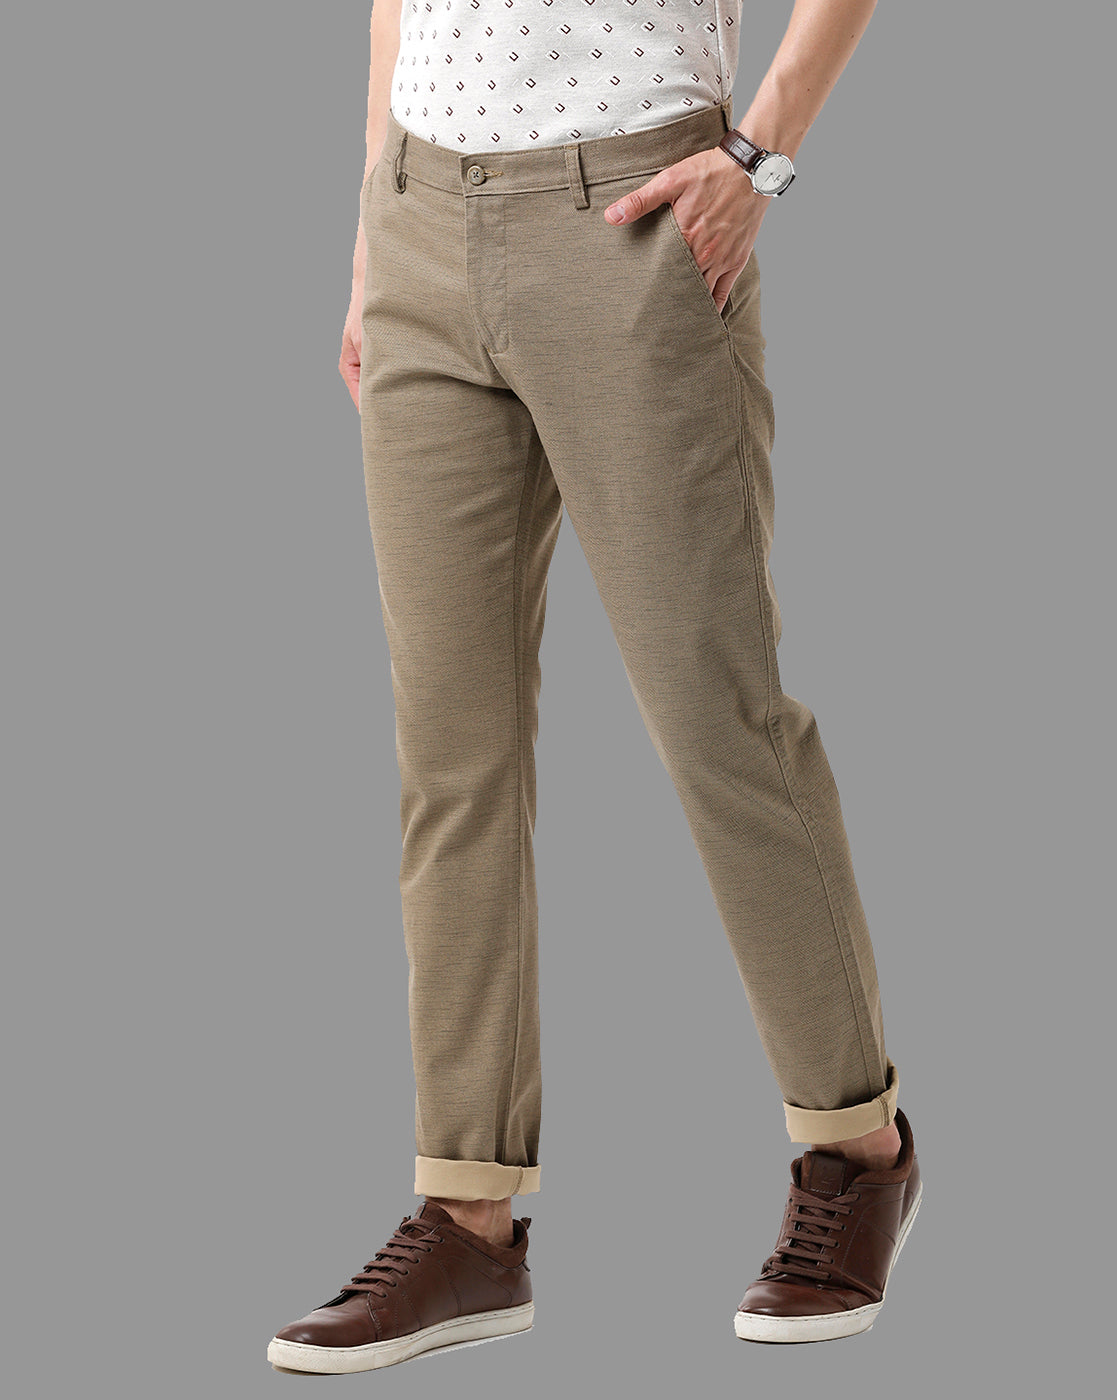 Buy ALLEN SOLLY Mens Smart Fit Solid Trousers  Shoppers Stop